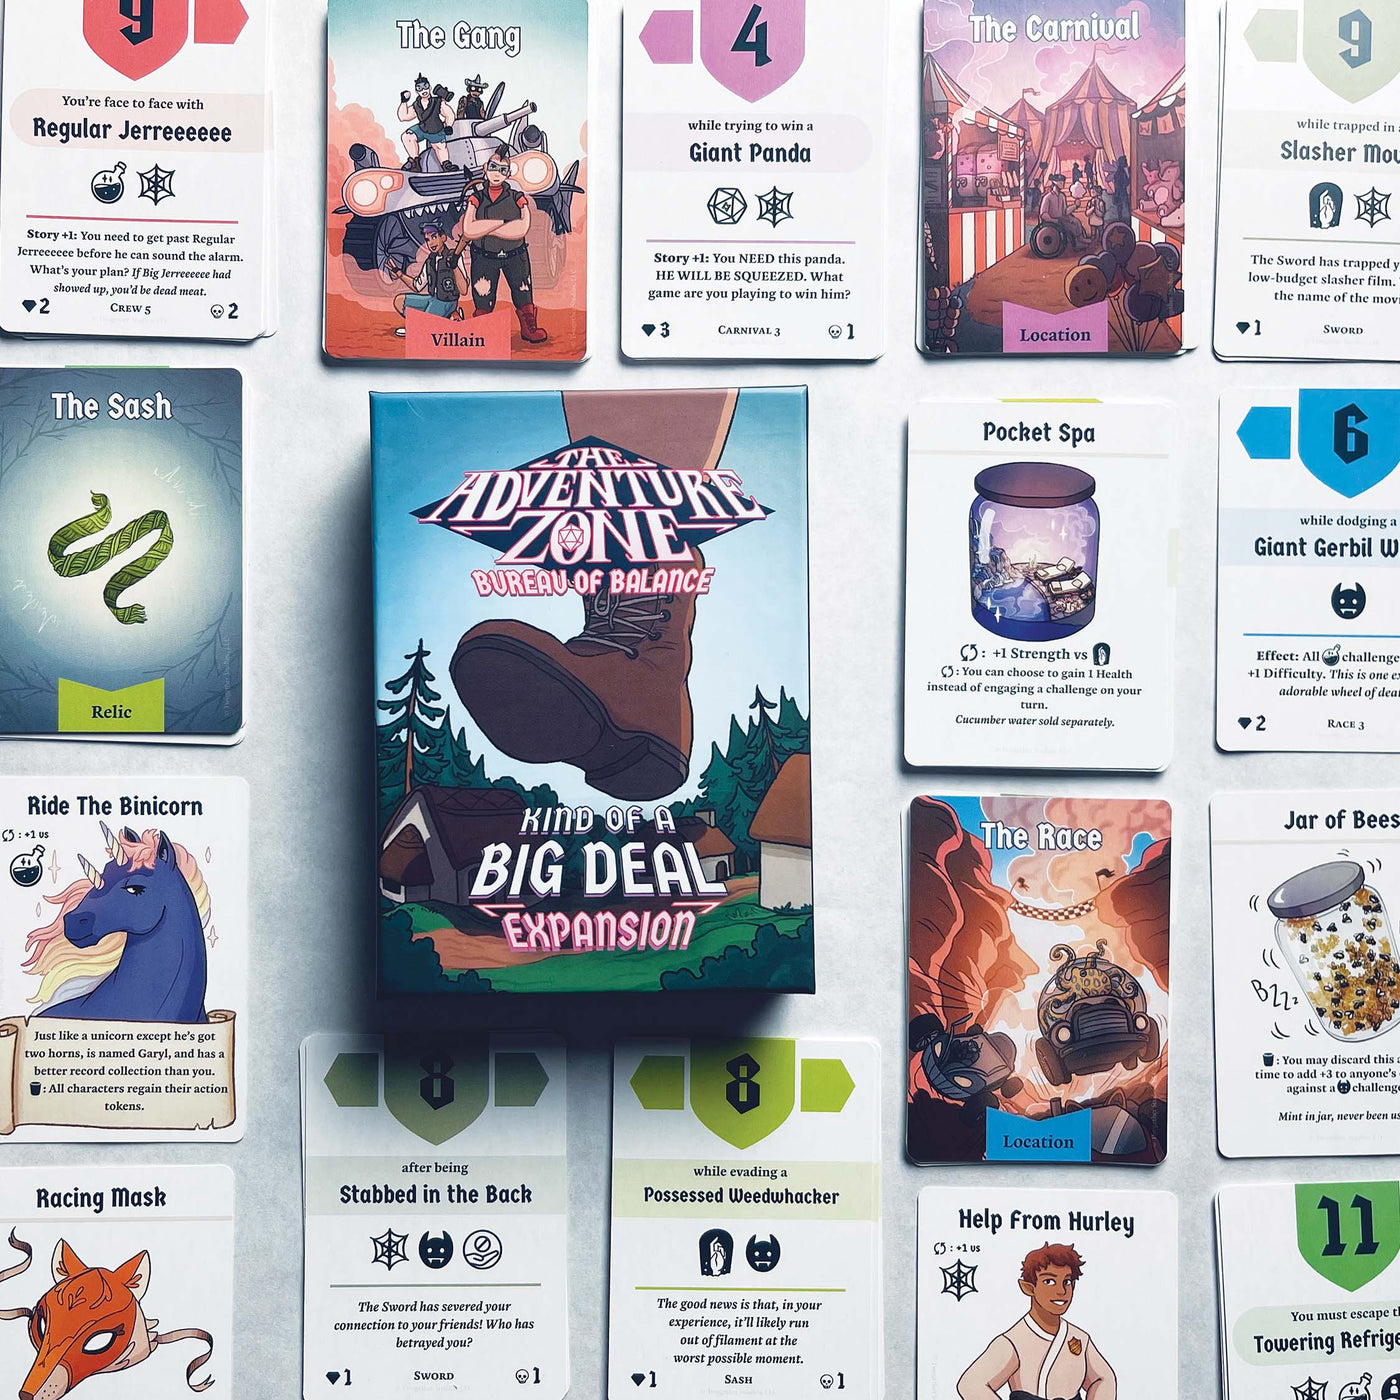 The Adventure Zone: Kind of Big Deal Expansion